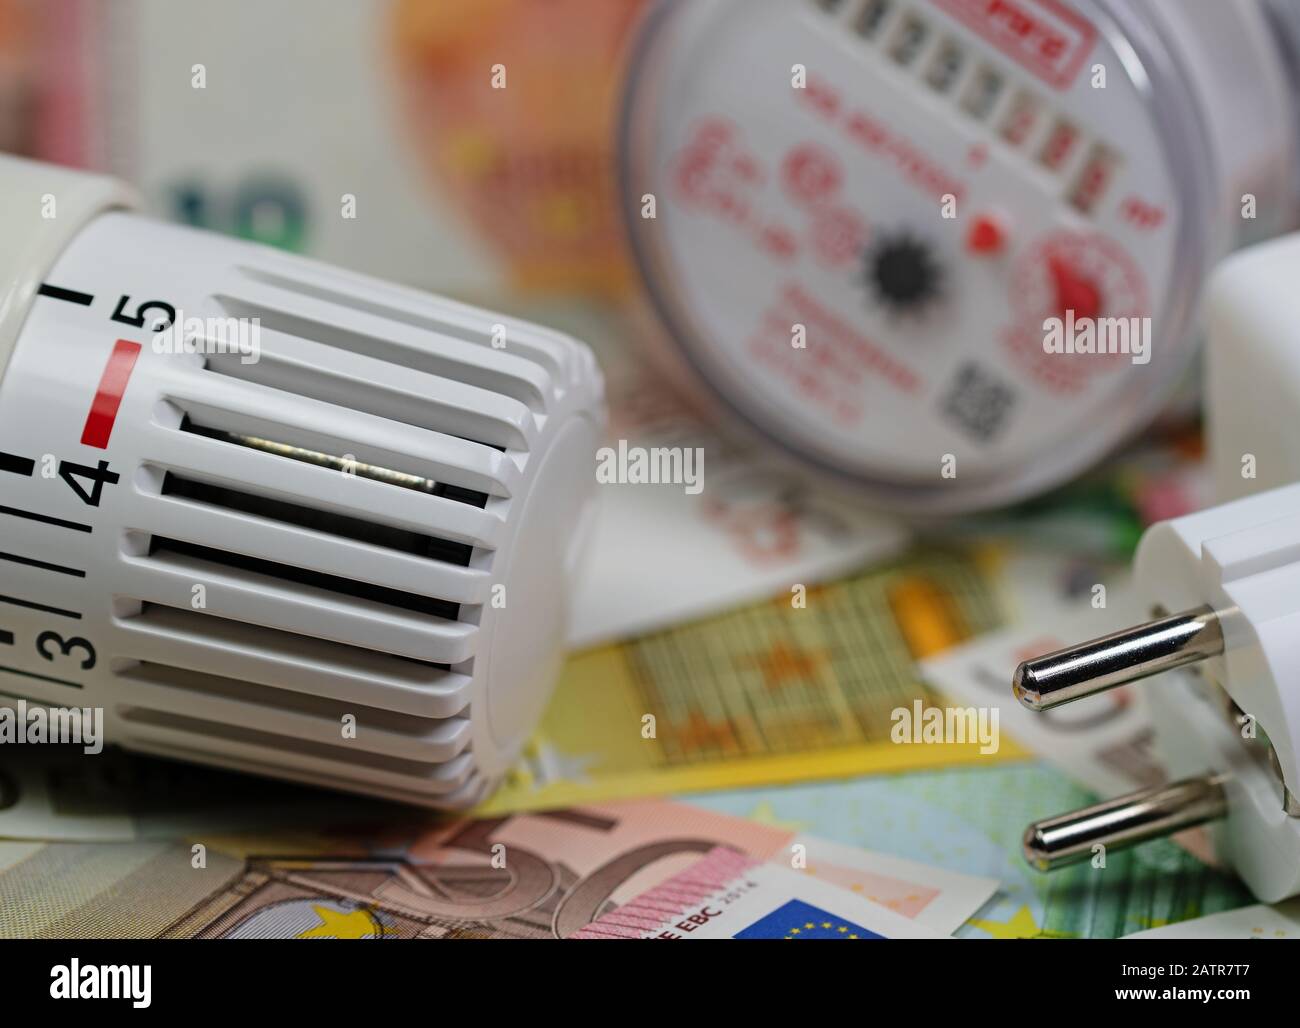 Heating costs, electricity costs, symbolic representation Stock Photo